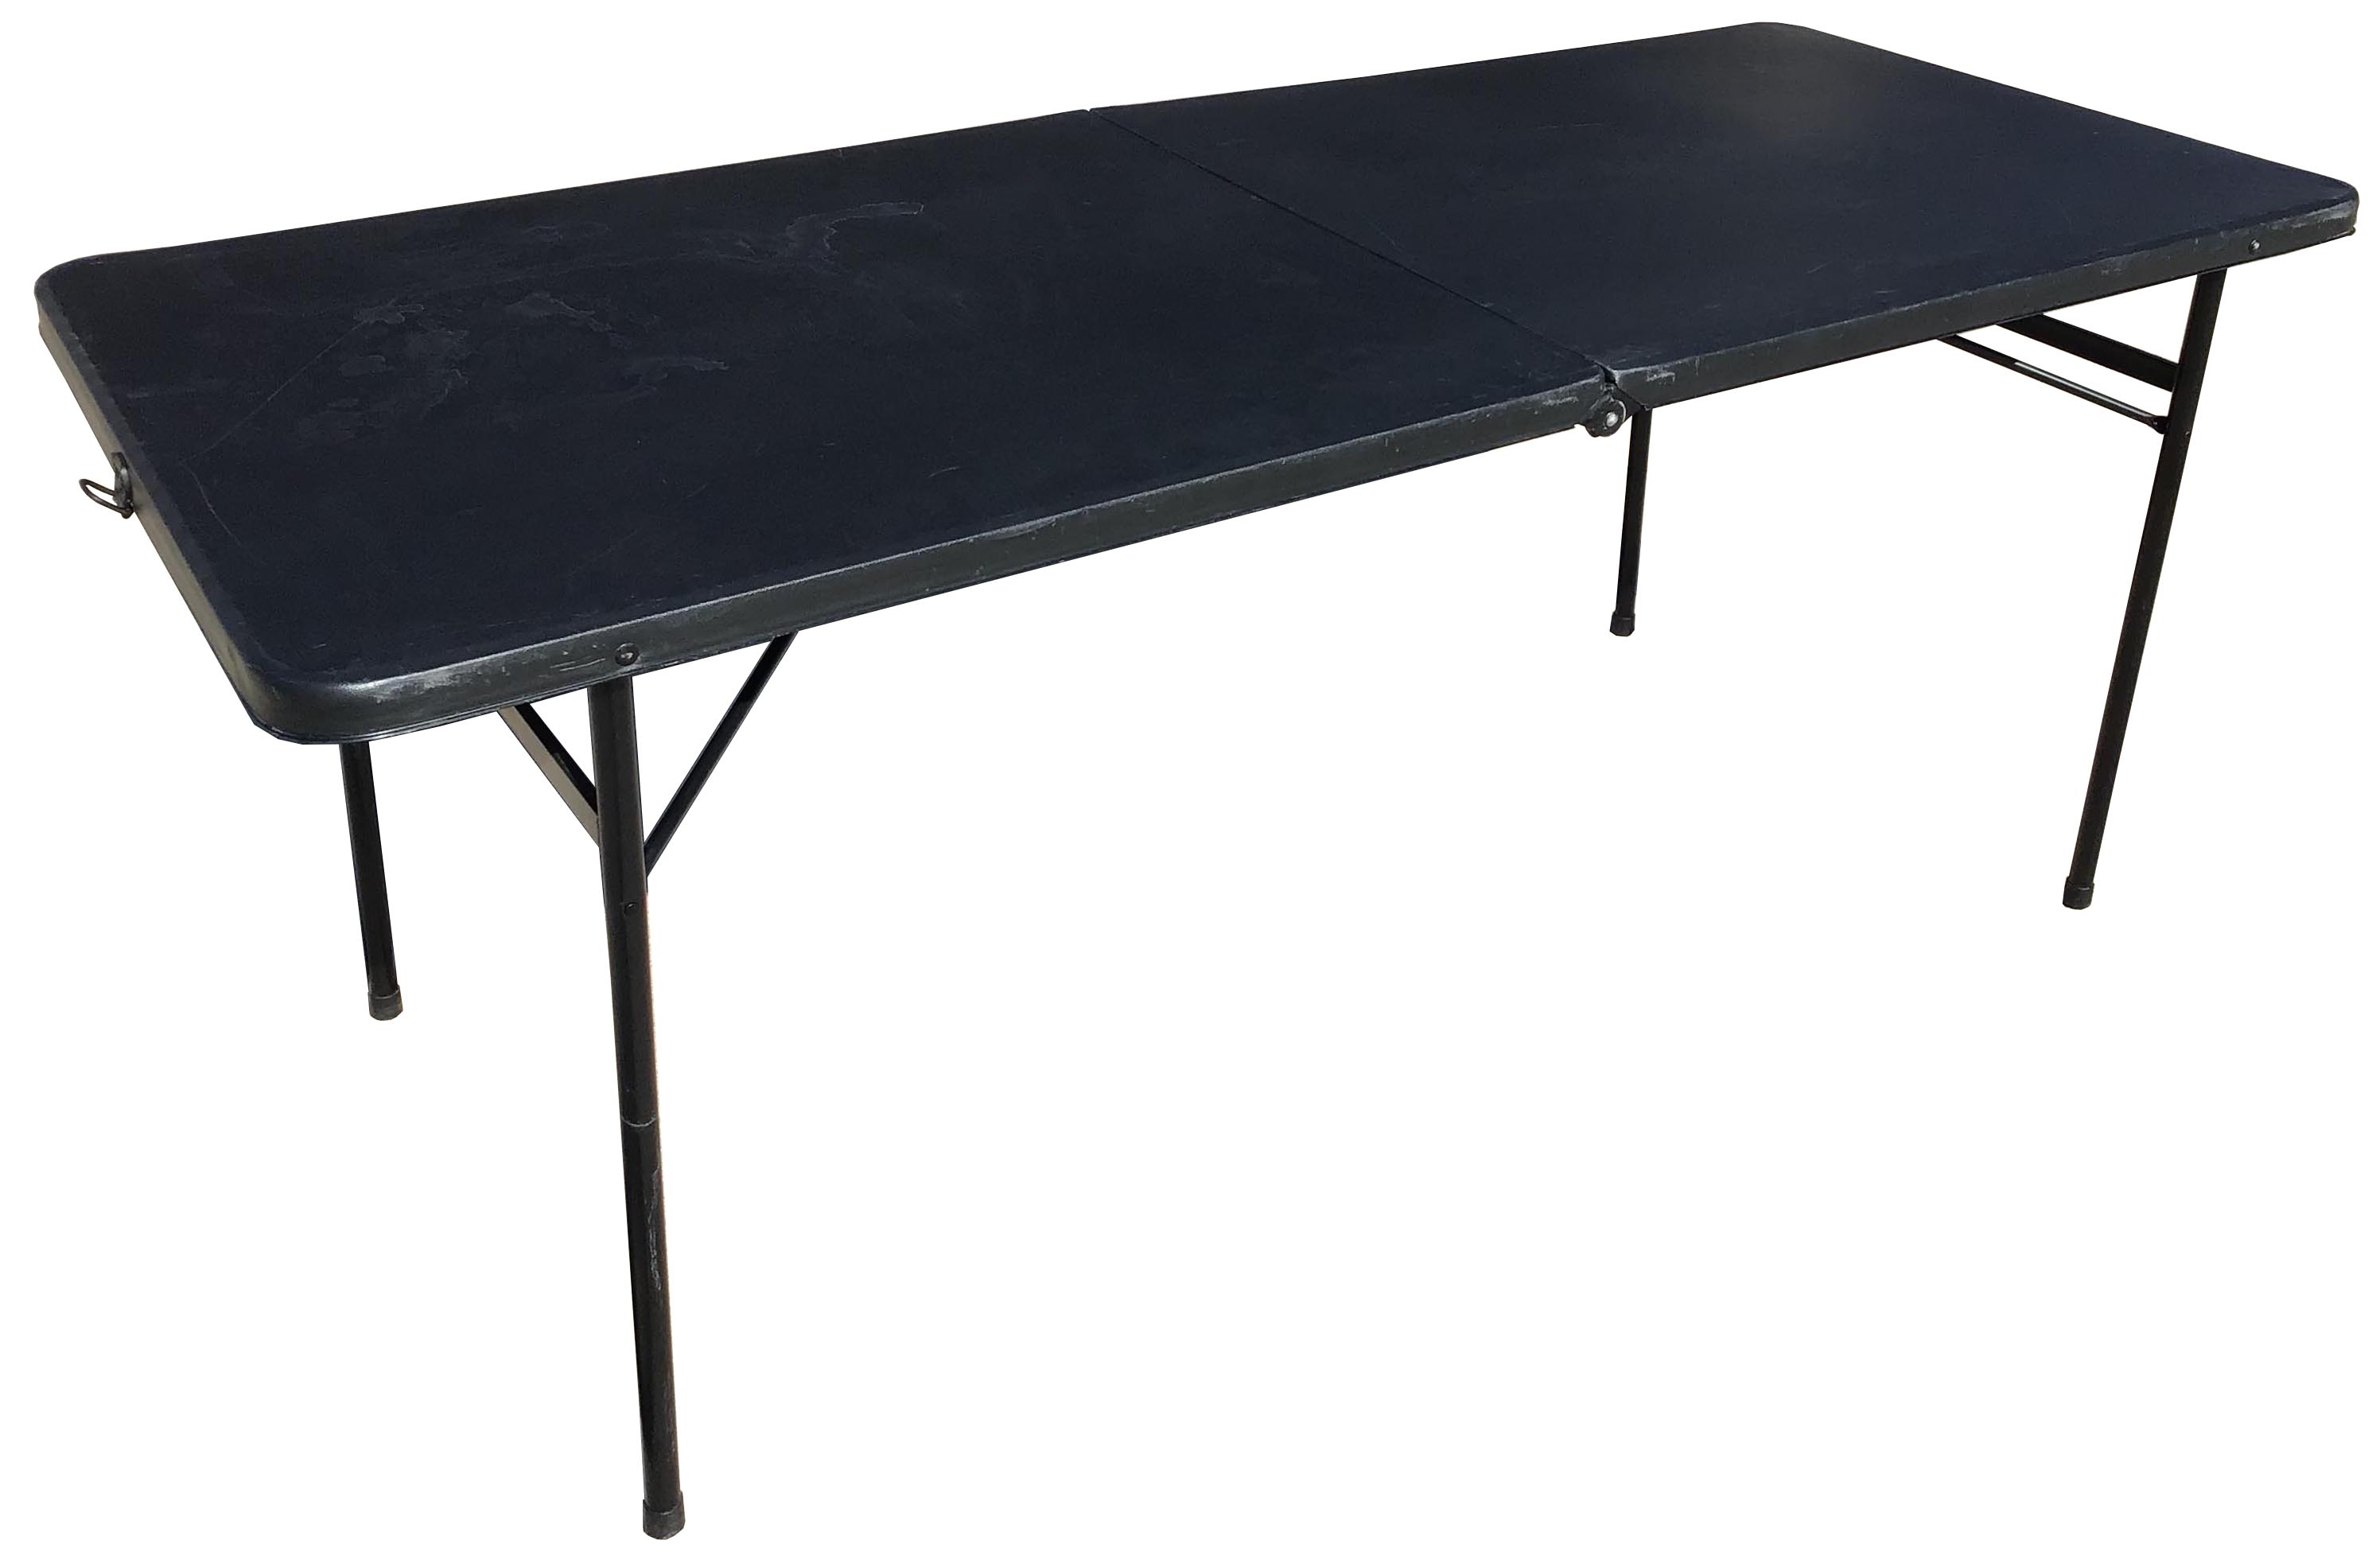 6 foot rectangle tables